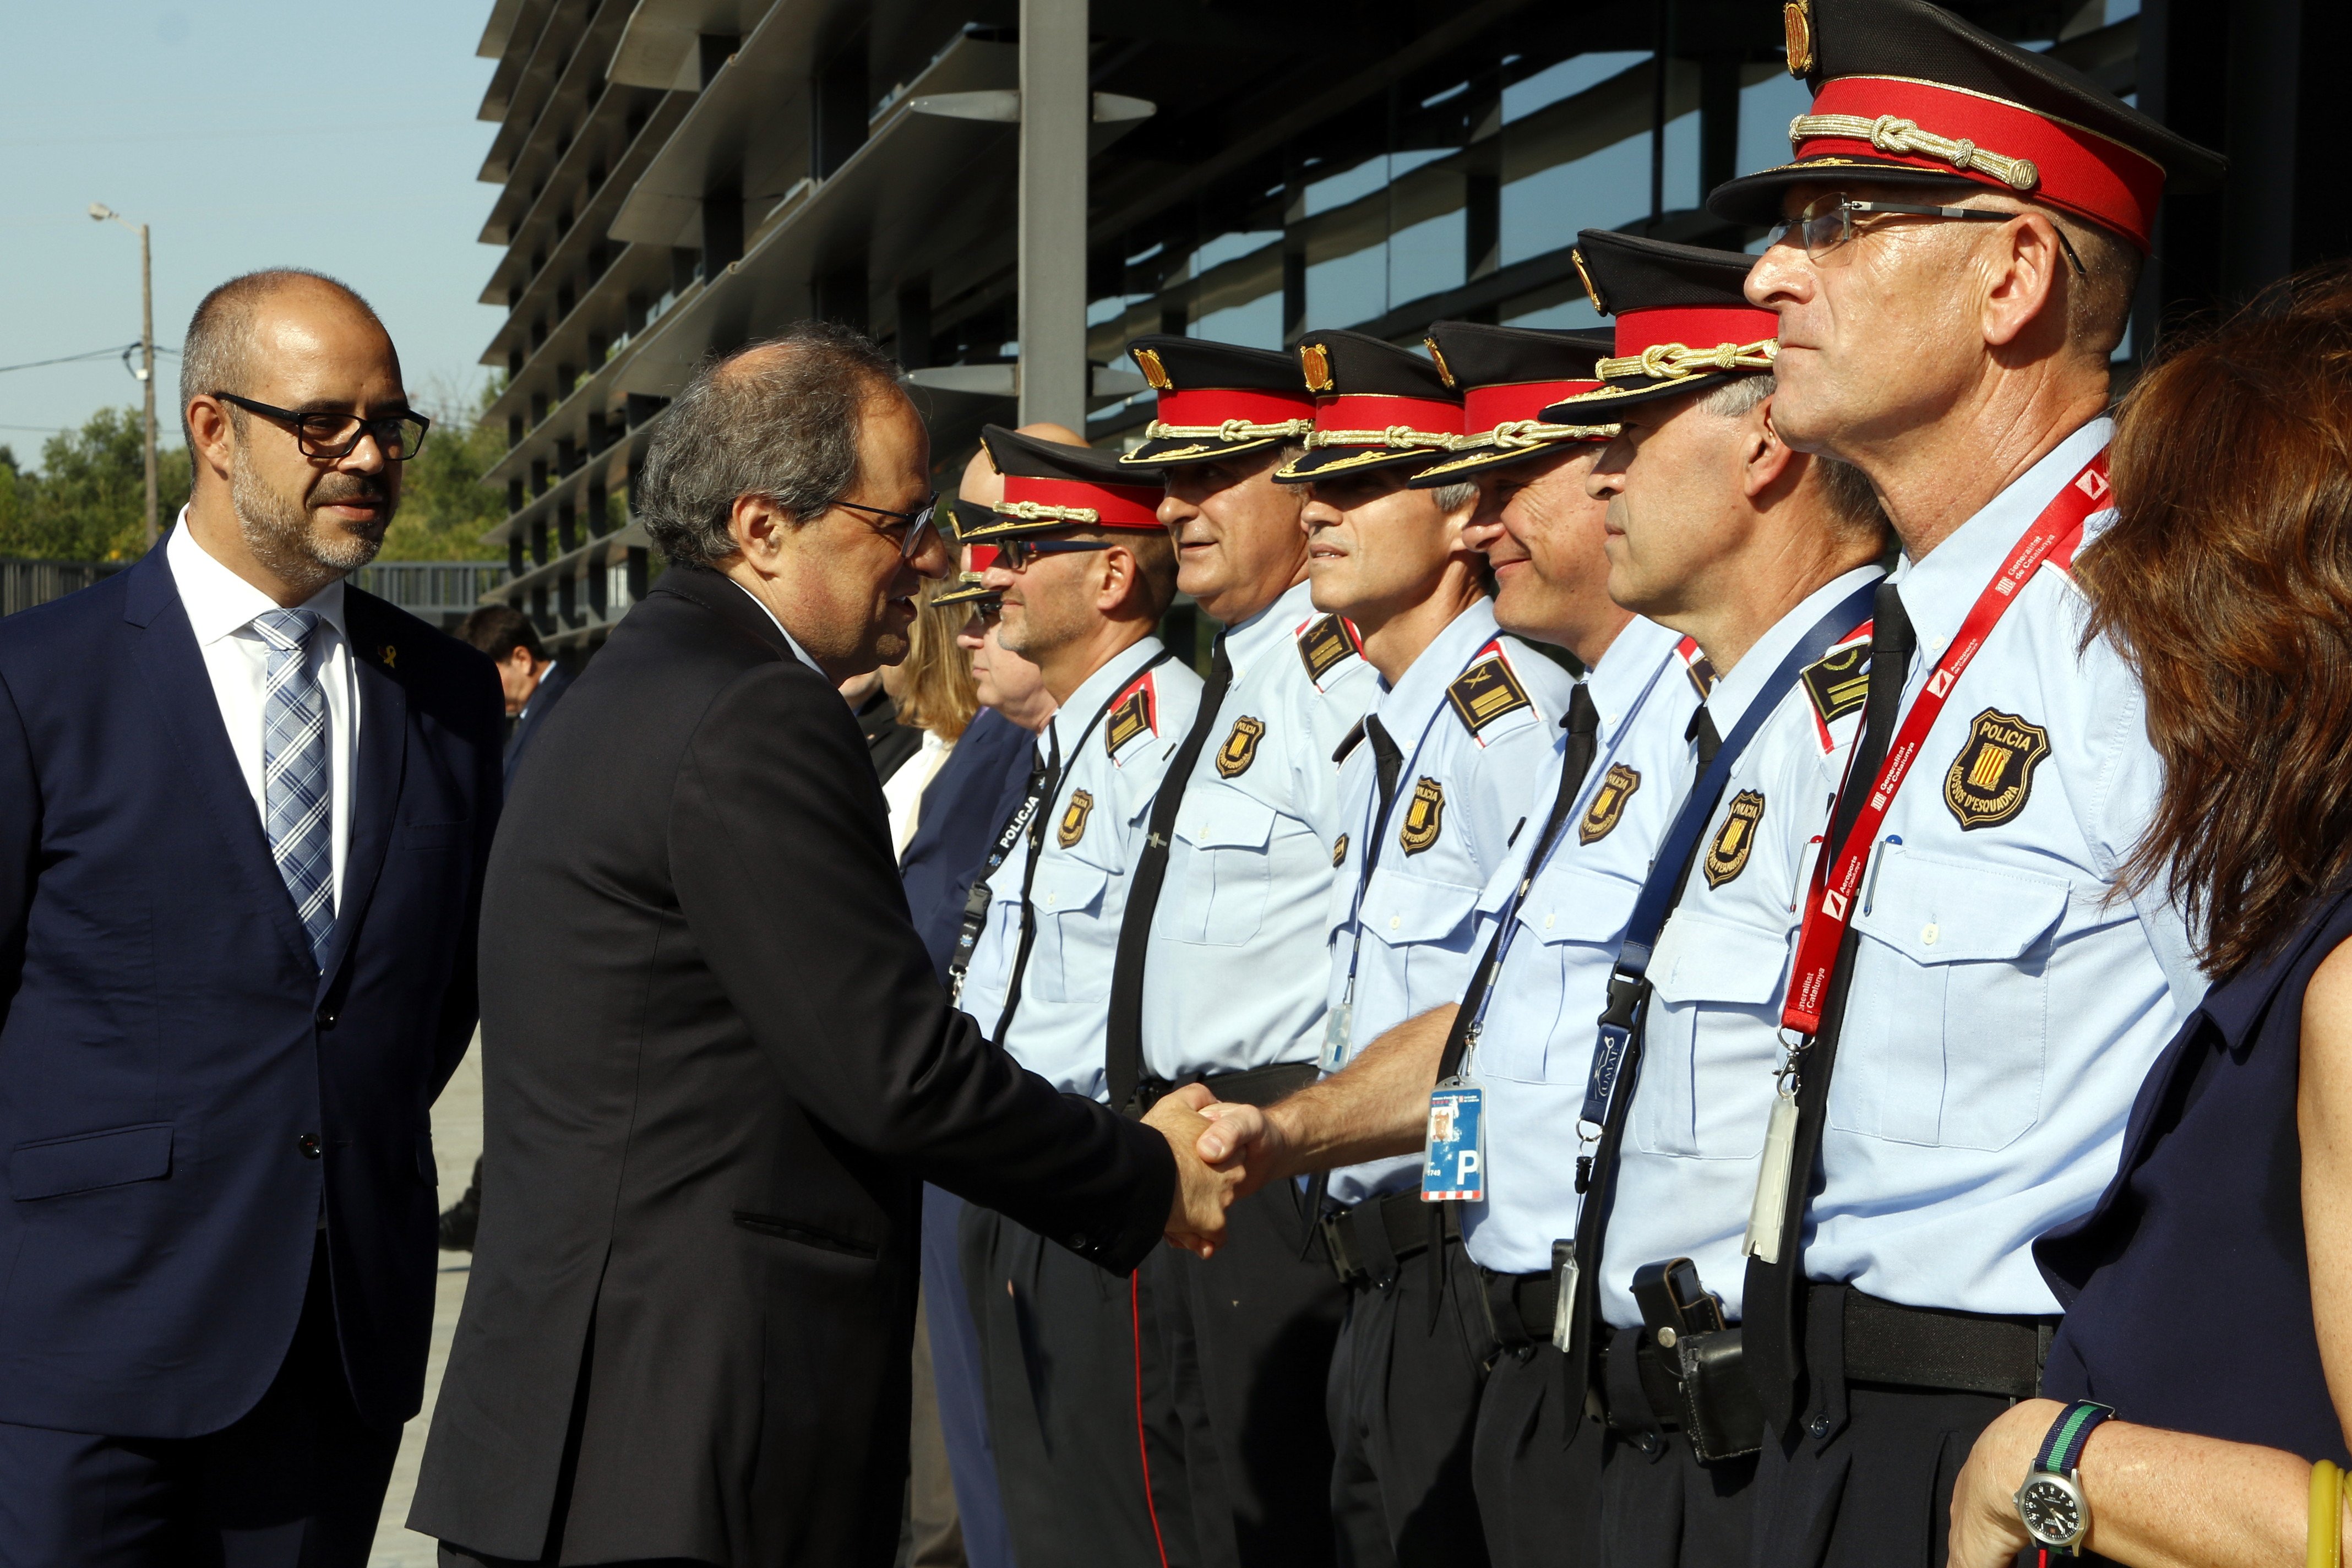 Spain prevents Catalan police accompanying president Torra to Brussels as bodyguards